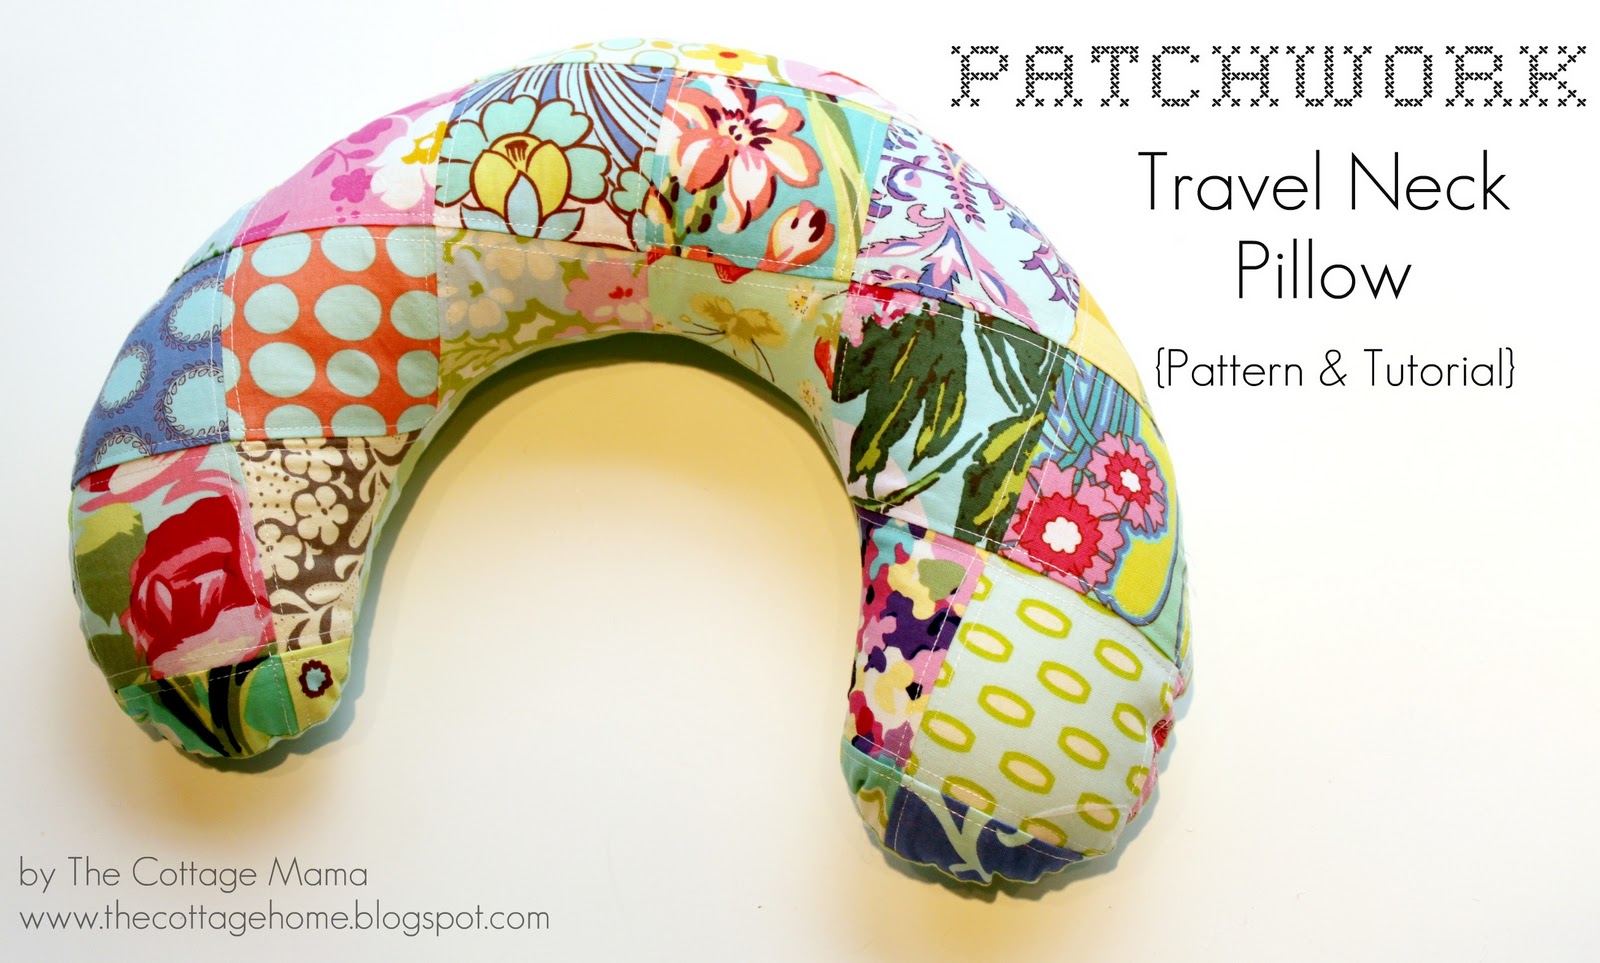 patchwork-travel-neck-pillow-pattern-tutorial-the-cottage-mama